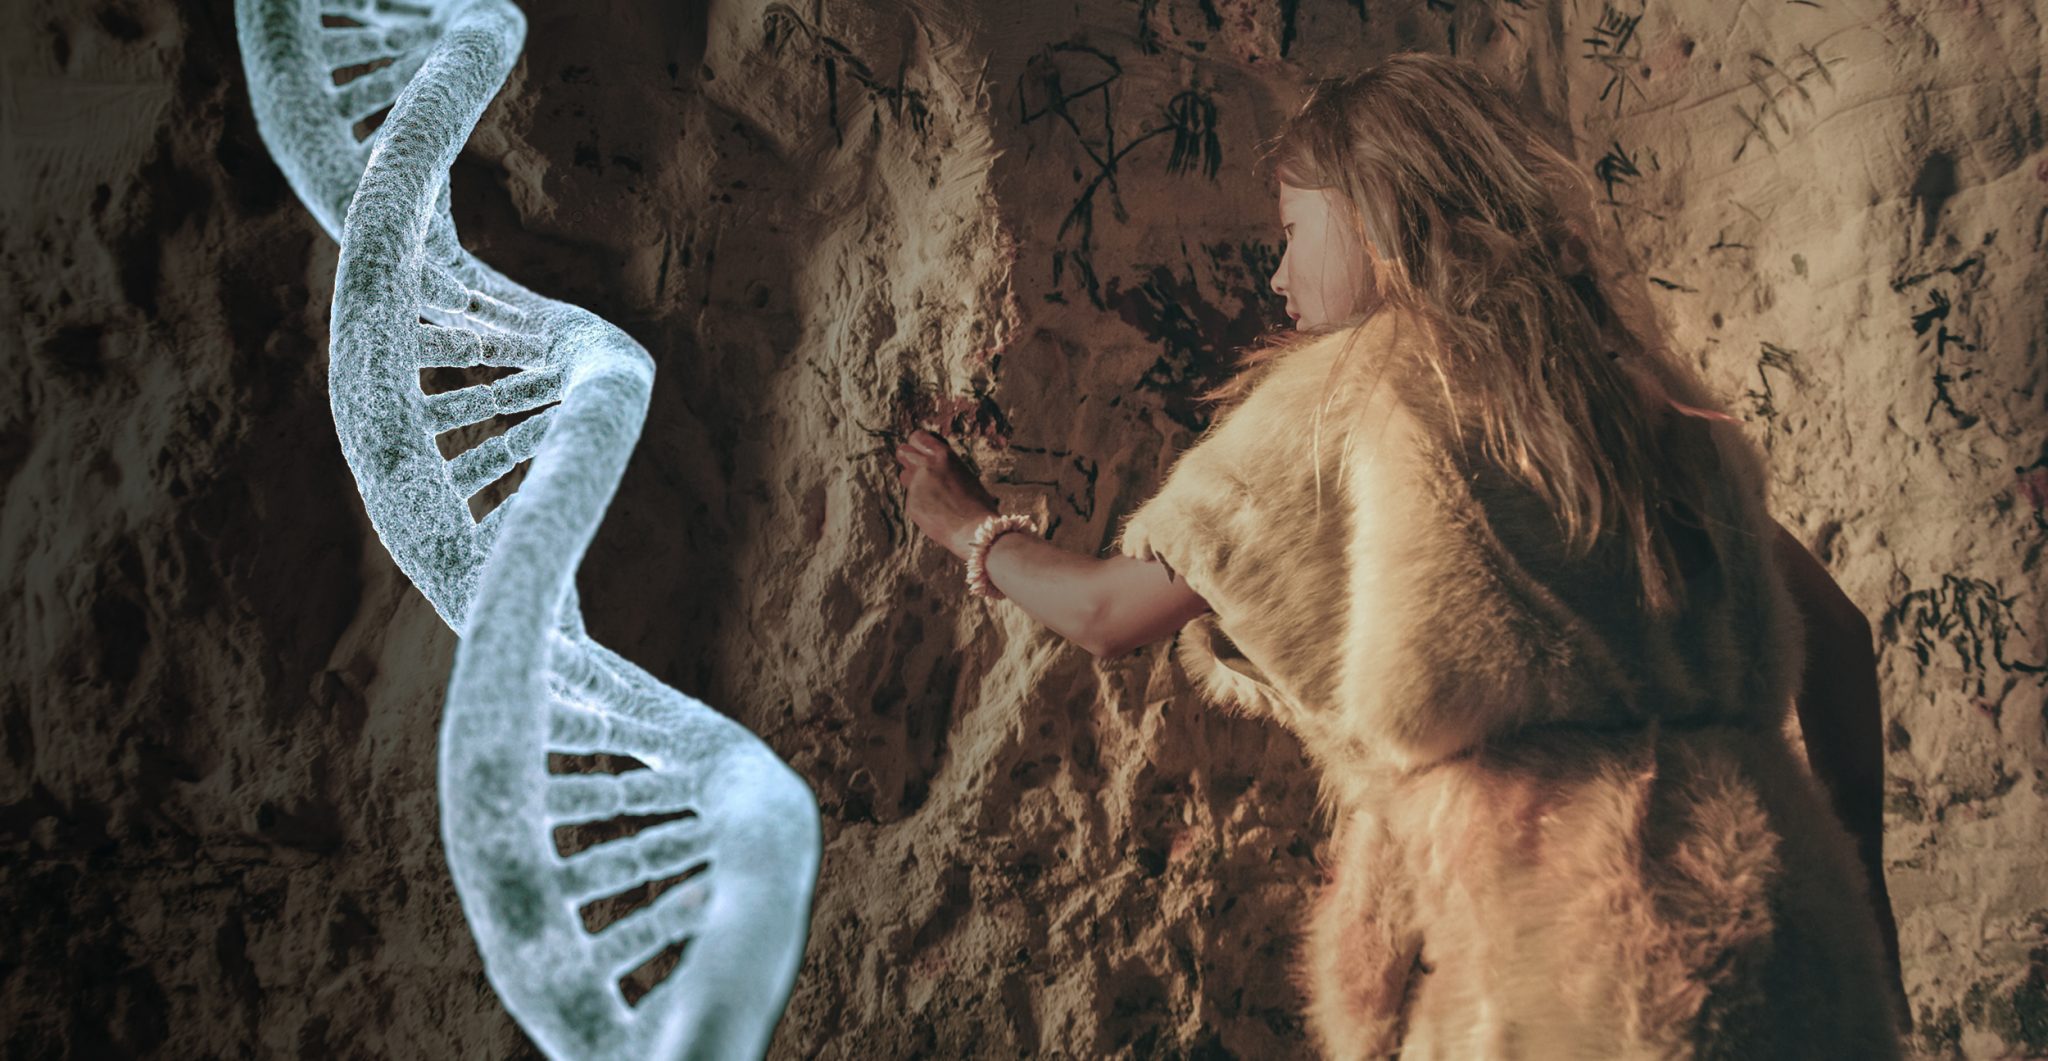 DNA strand and girl making cave drawings